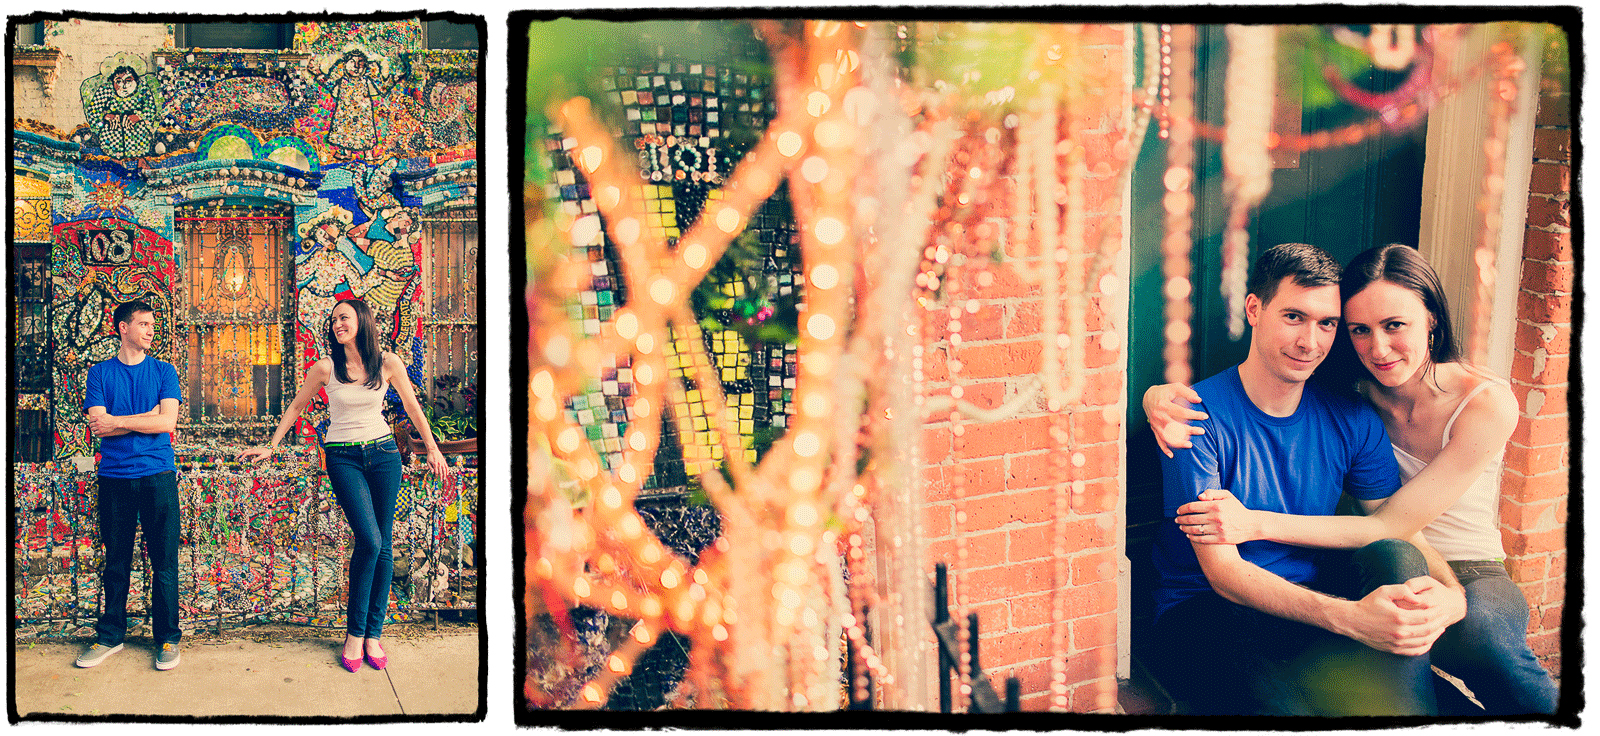 Engagement Portrait: Pat & Shannon show off the artistic decor in their neighborhood in Brooklyn.